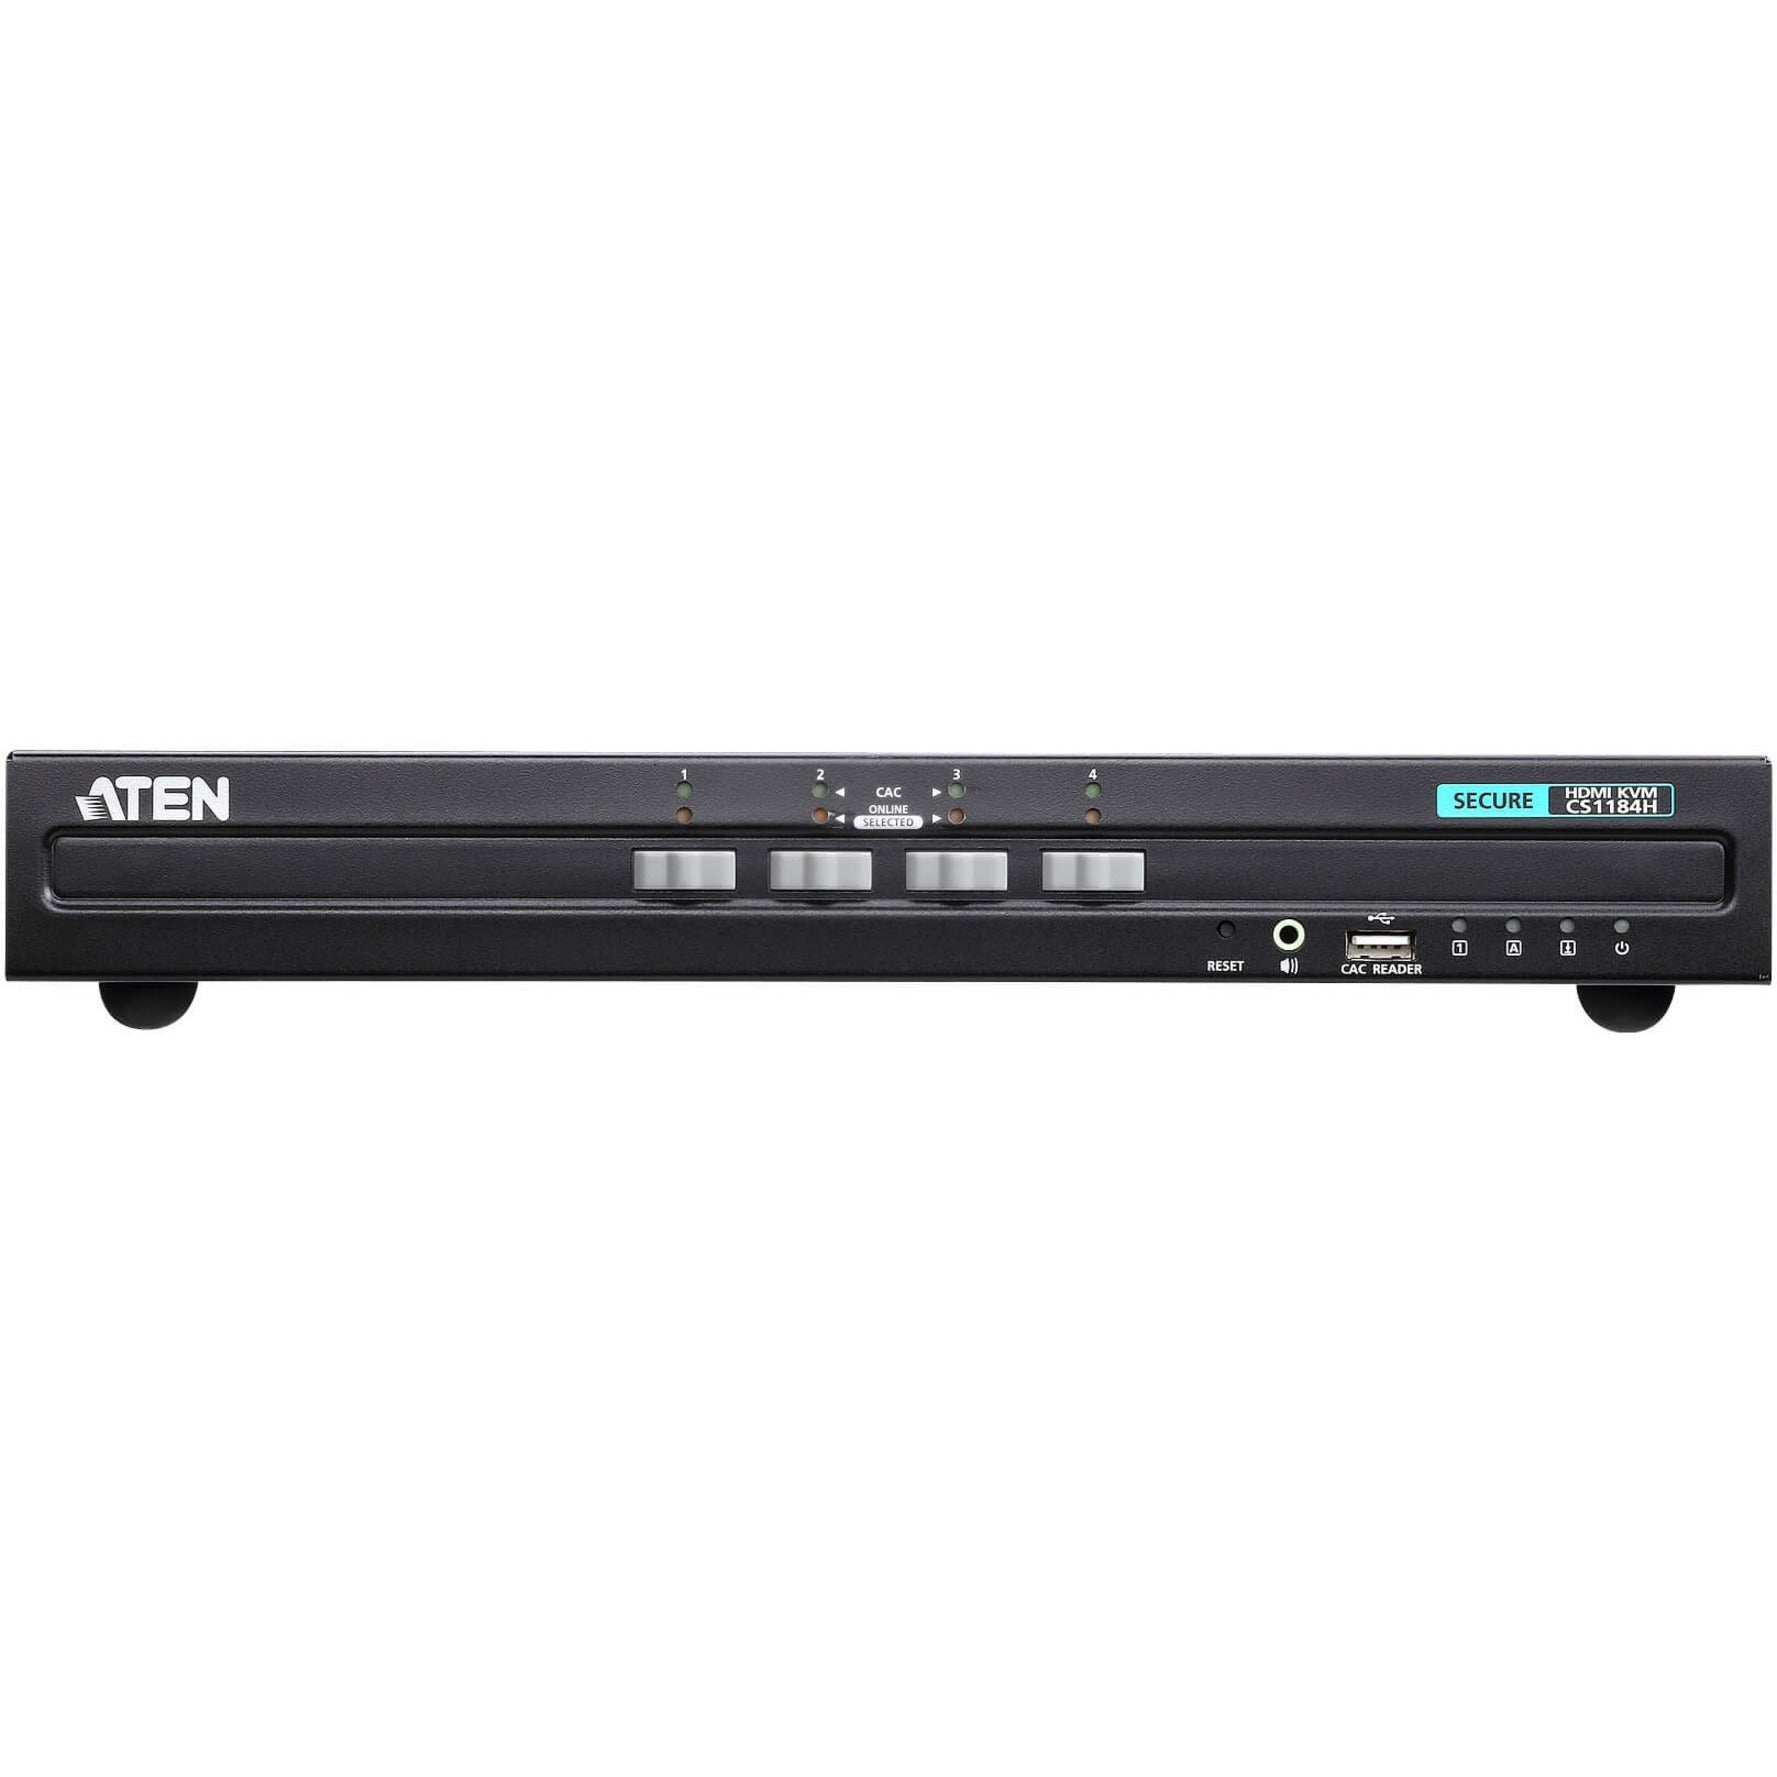 ATEN 4 Port Single Display HDMI Secure KVM Switch [Discontinued]